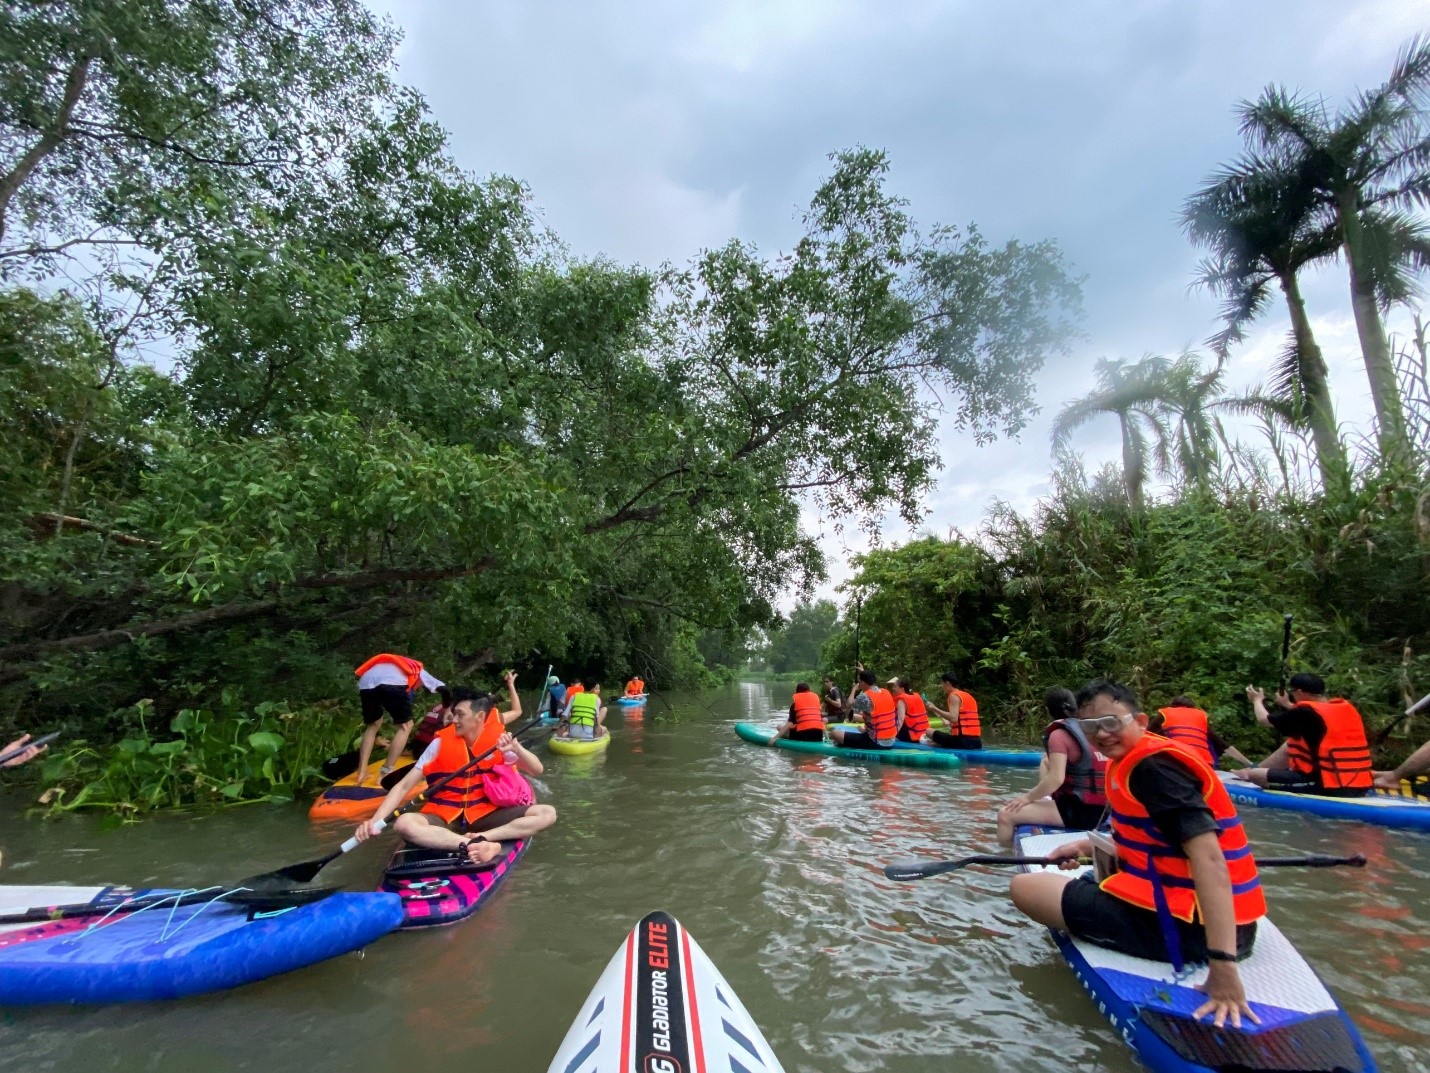 What’s SUP!?: Stand-up paddle boarding makes a splash with young people in Ho Chi Minh City